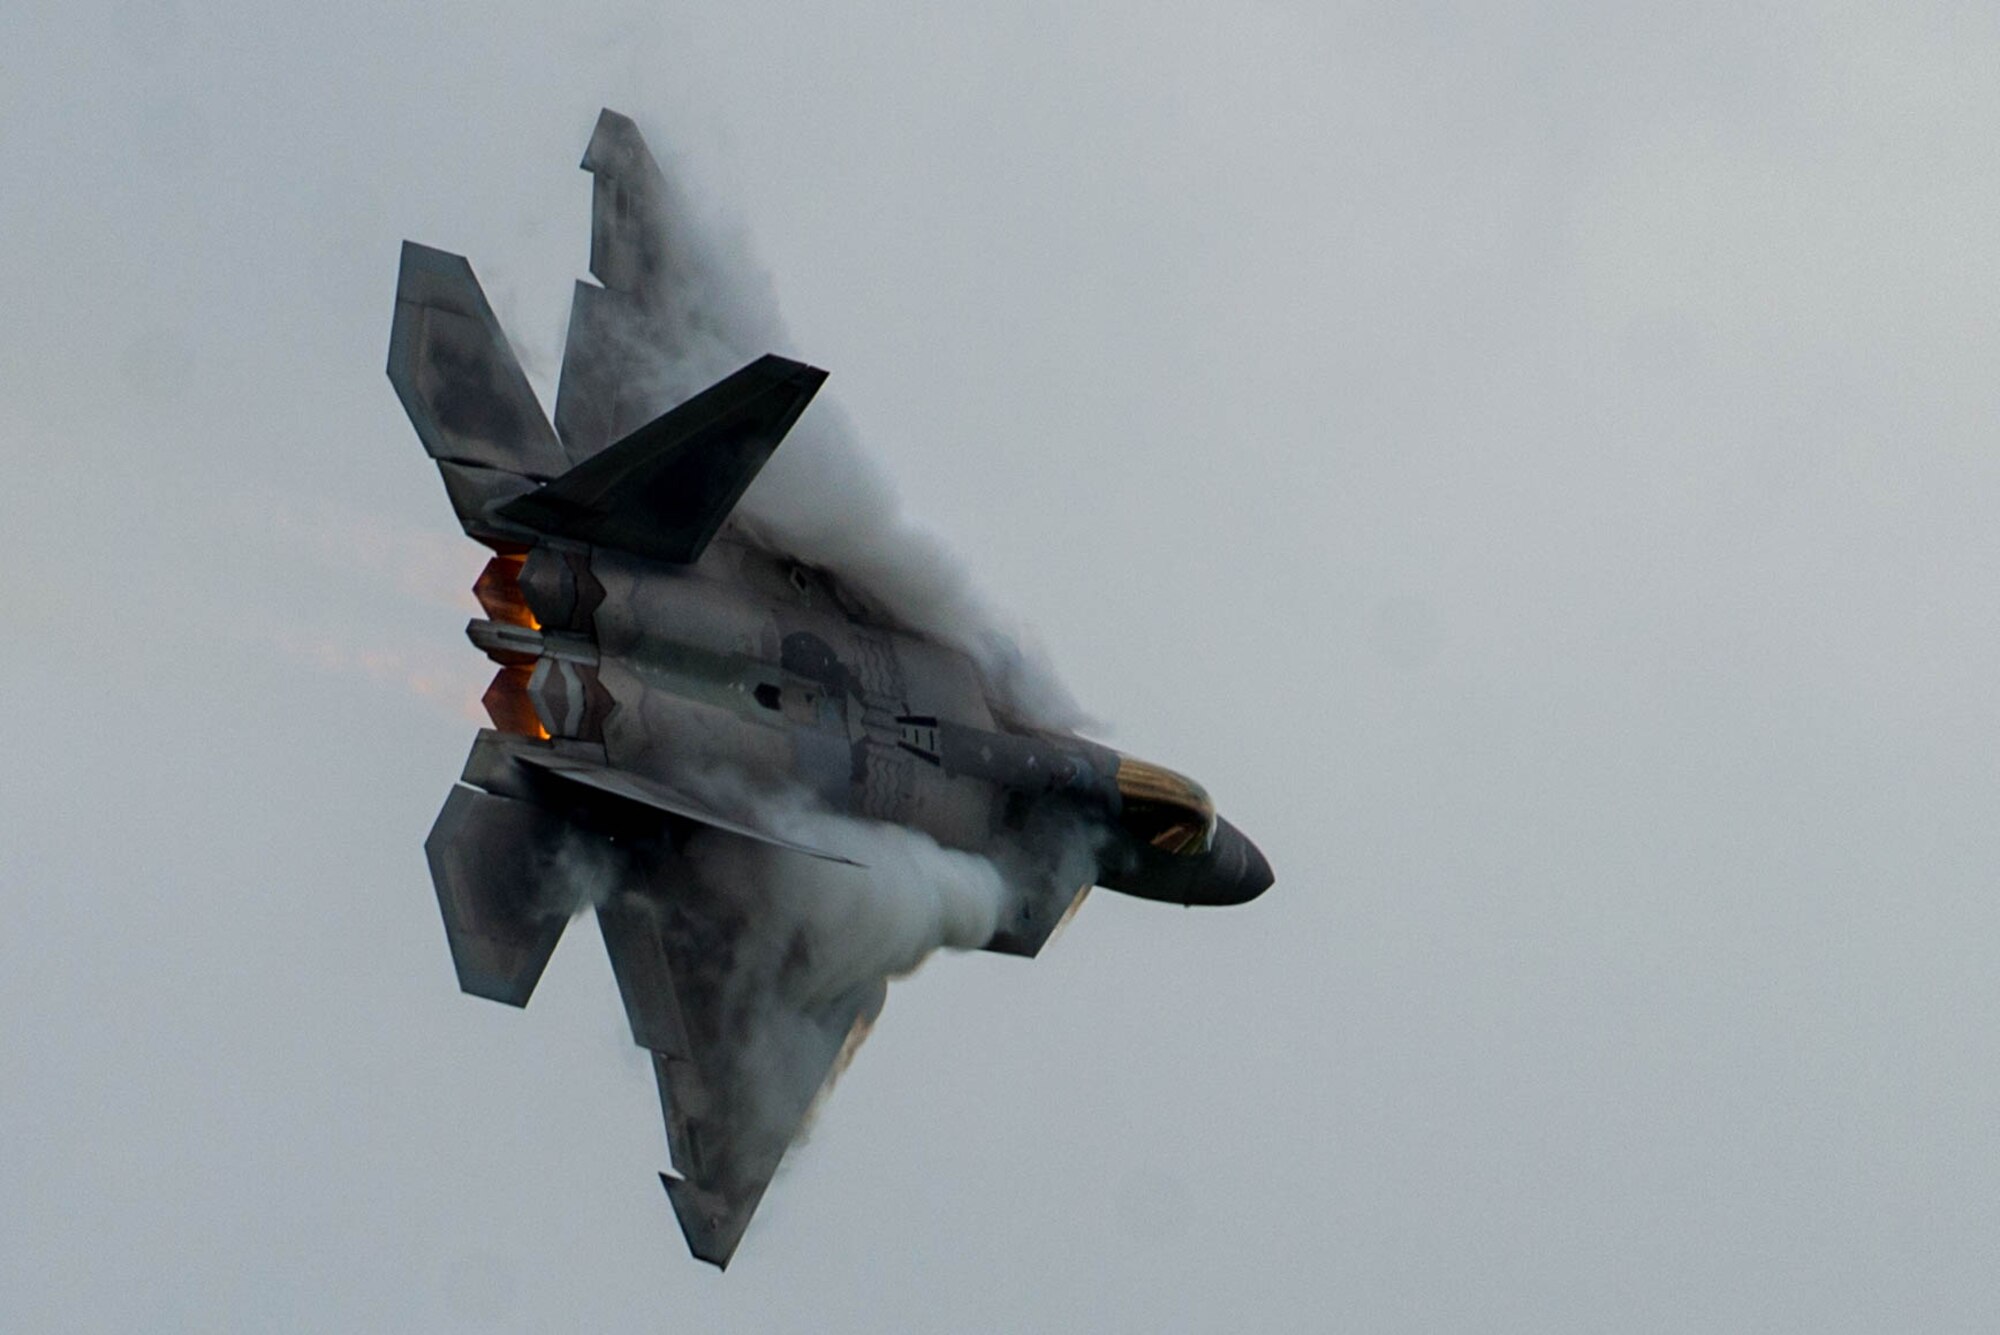 U.S. Air Force Maj. Paul "Loco" Lopez, F-22 Raptor Demonstration Team commander and pilot, performs during AirPower Over Hampton Roads JBLE Air and Space Expo at Joint Base Langley-Eustis, Virginia, May 20, 2018.